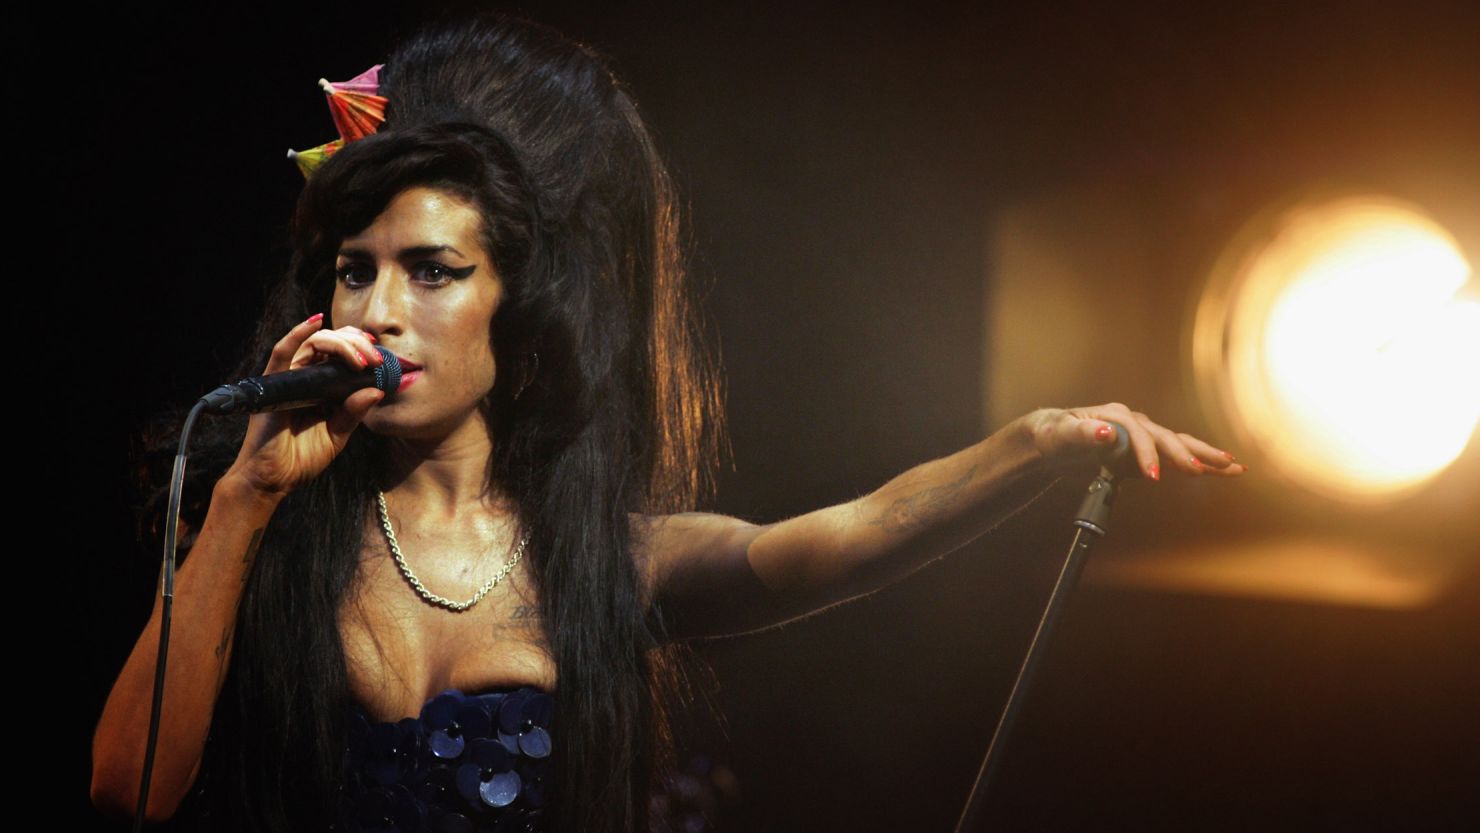 GLASTONBURY, UNITED KINGDOM - JUNE 28:  Amy Winehouse performs on the Pyramid Stage at the Glastonbury Festival at Worthy Farm, Pilton on June 28 2008 in Glastonbury, Somerset, England. Nearly 175,000 people were expected to be on site for the three-day music festival which started yesterday and features headline acts Kings of Leon, rapper Jay-Z and Britpop veterans The Verve.  (Photo by Matt Cardy/Getty Images)